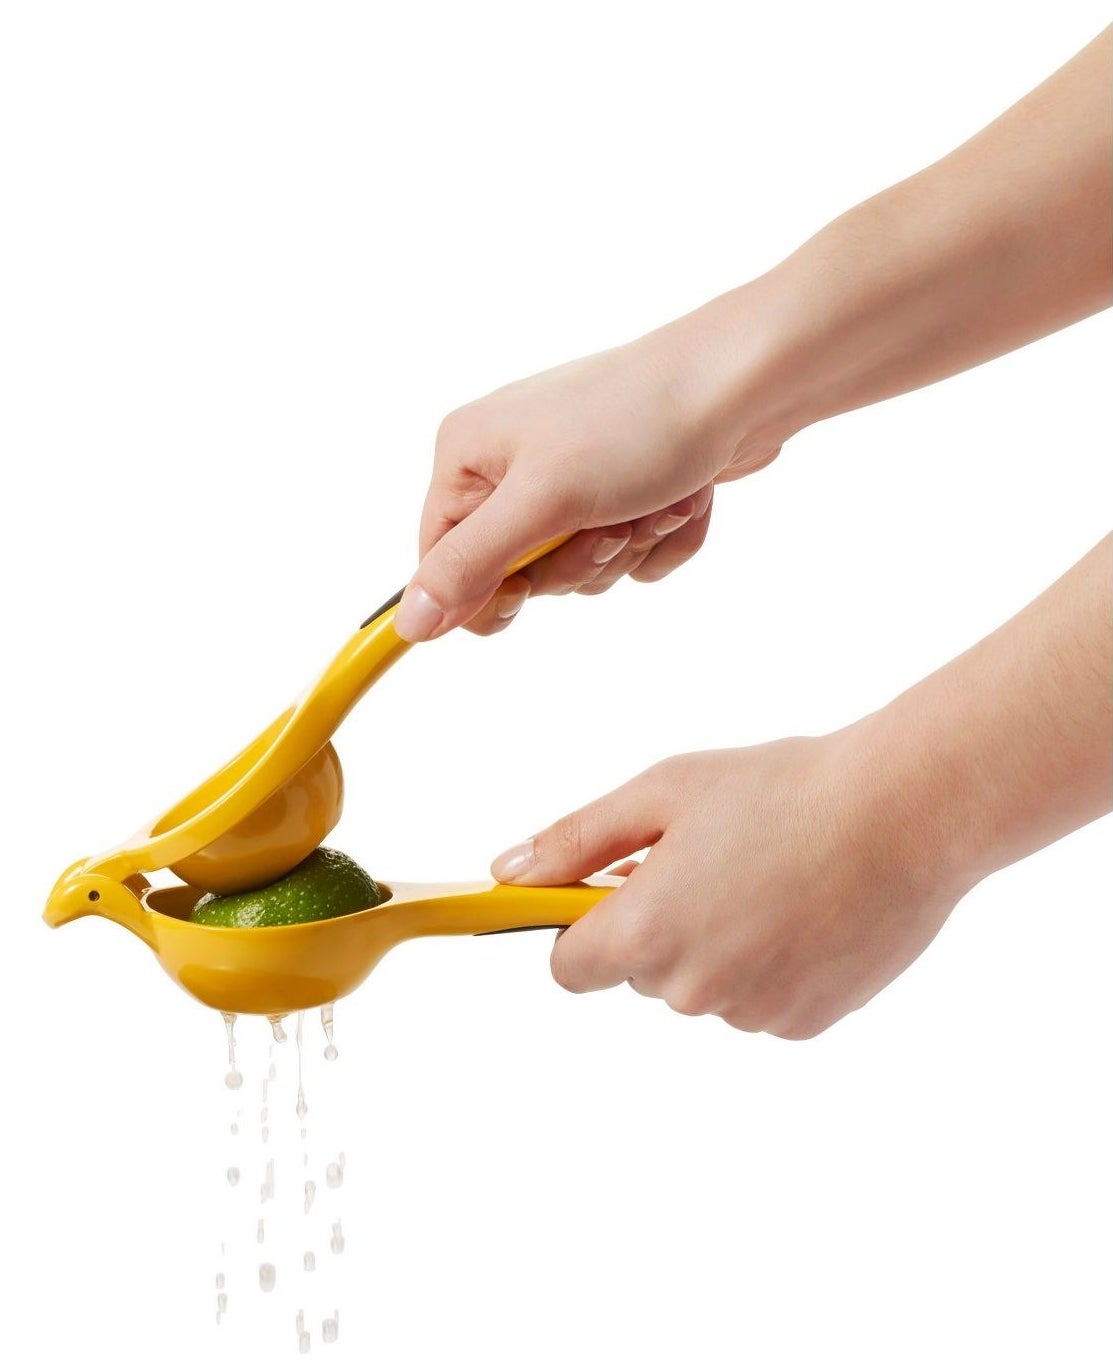 person using a citrus juicer to squeeze lime juice out of a lime